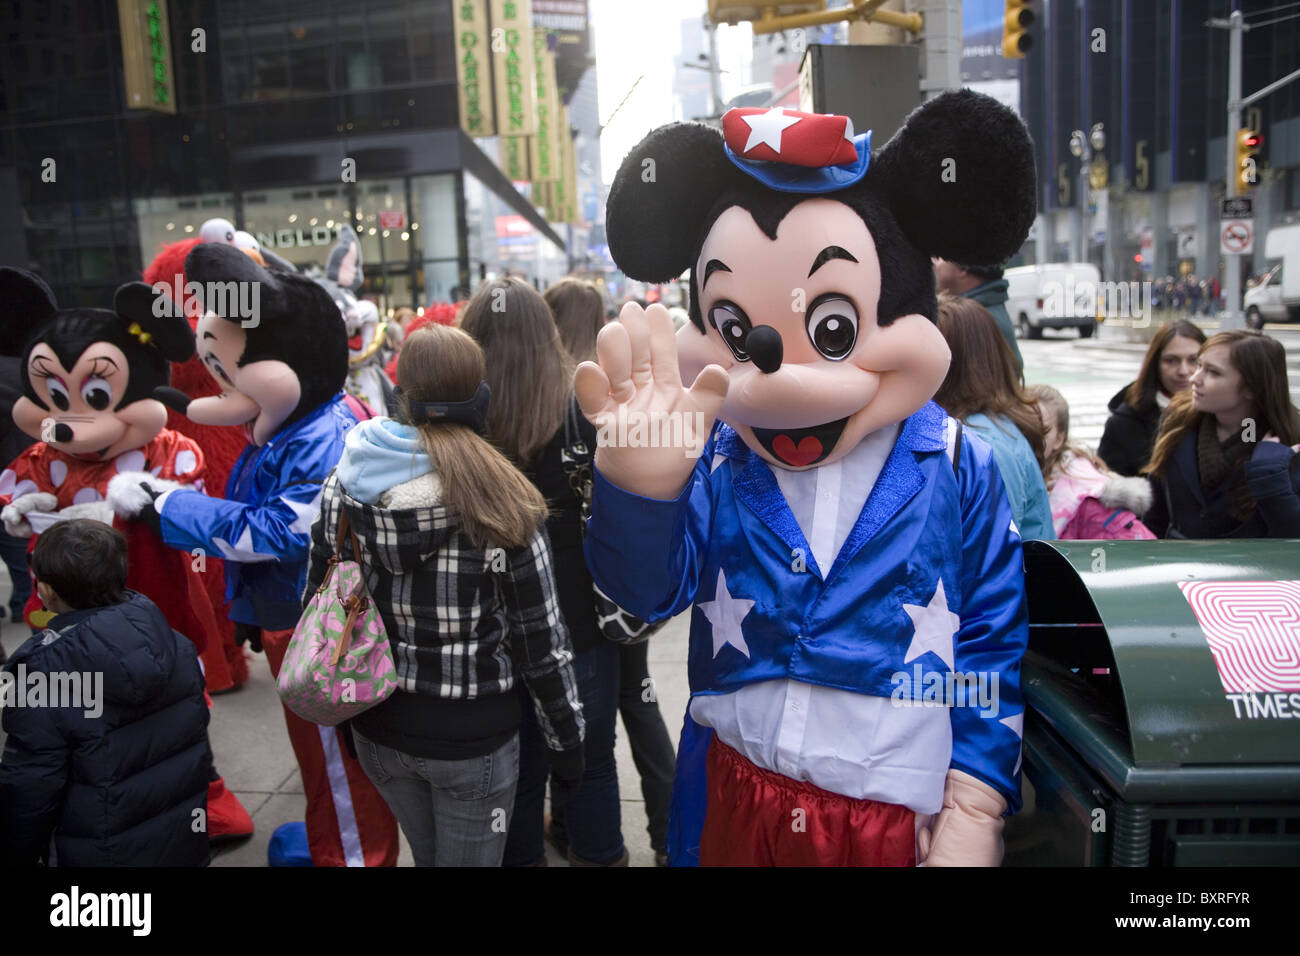 Some of the most famous cartoon characters can be seen on the streets of Manhattan during the holiday season. Stock Photo